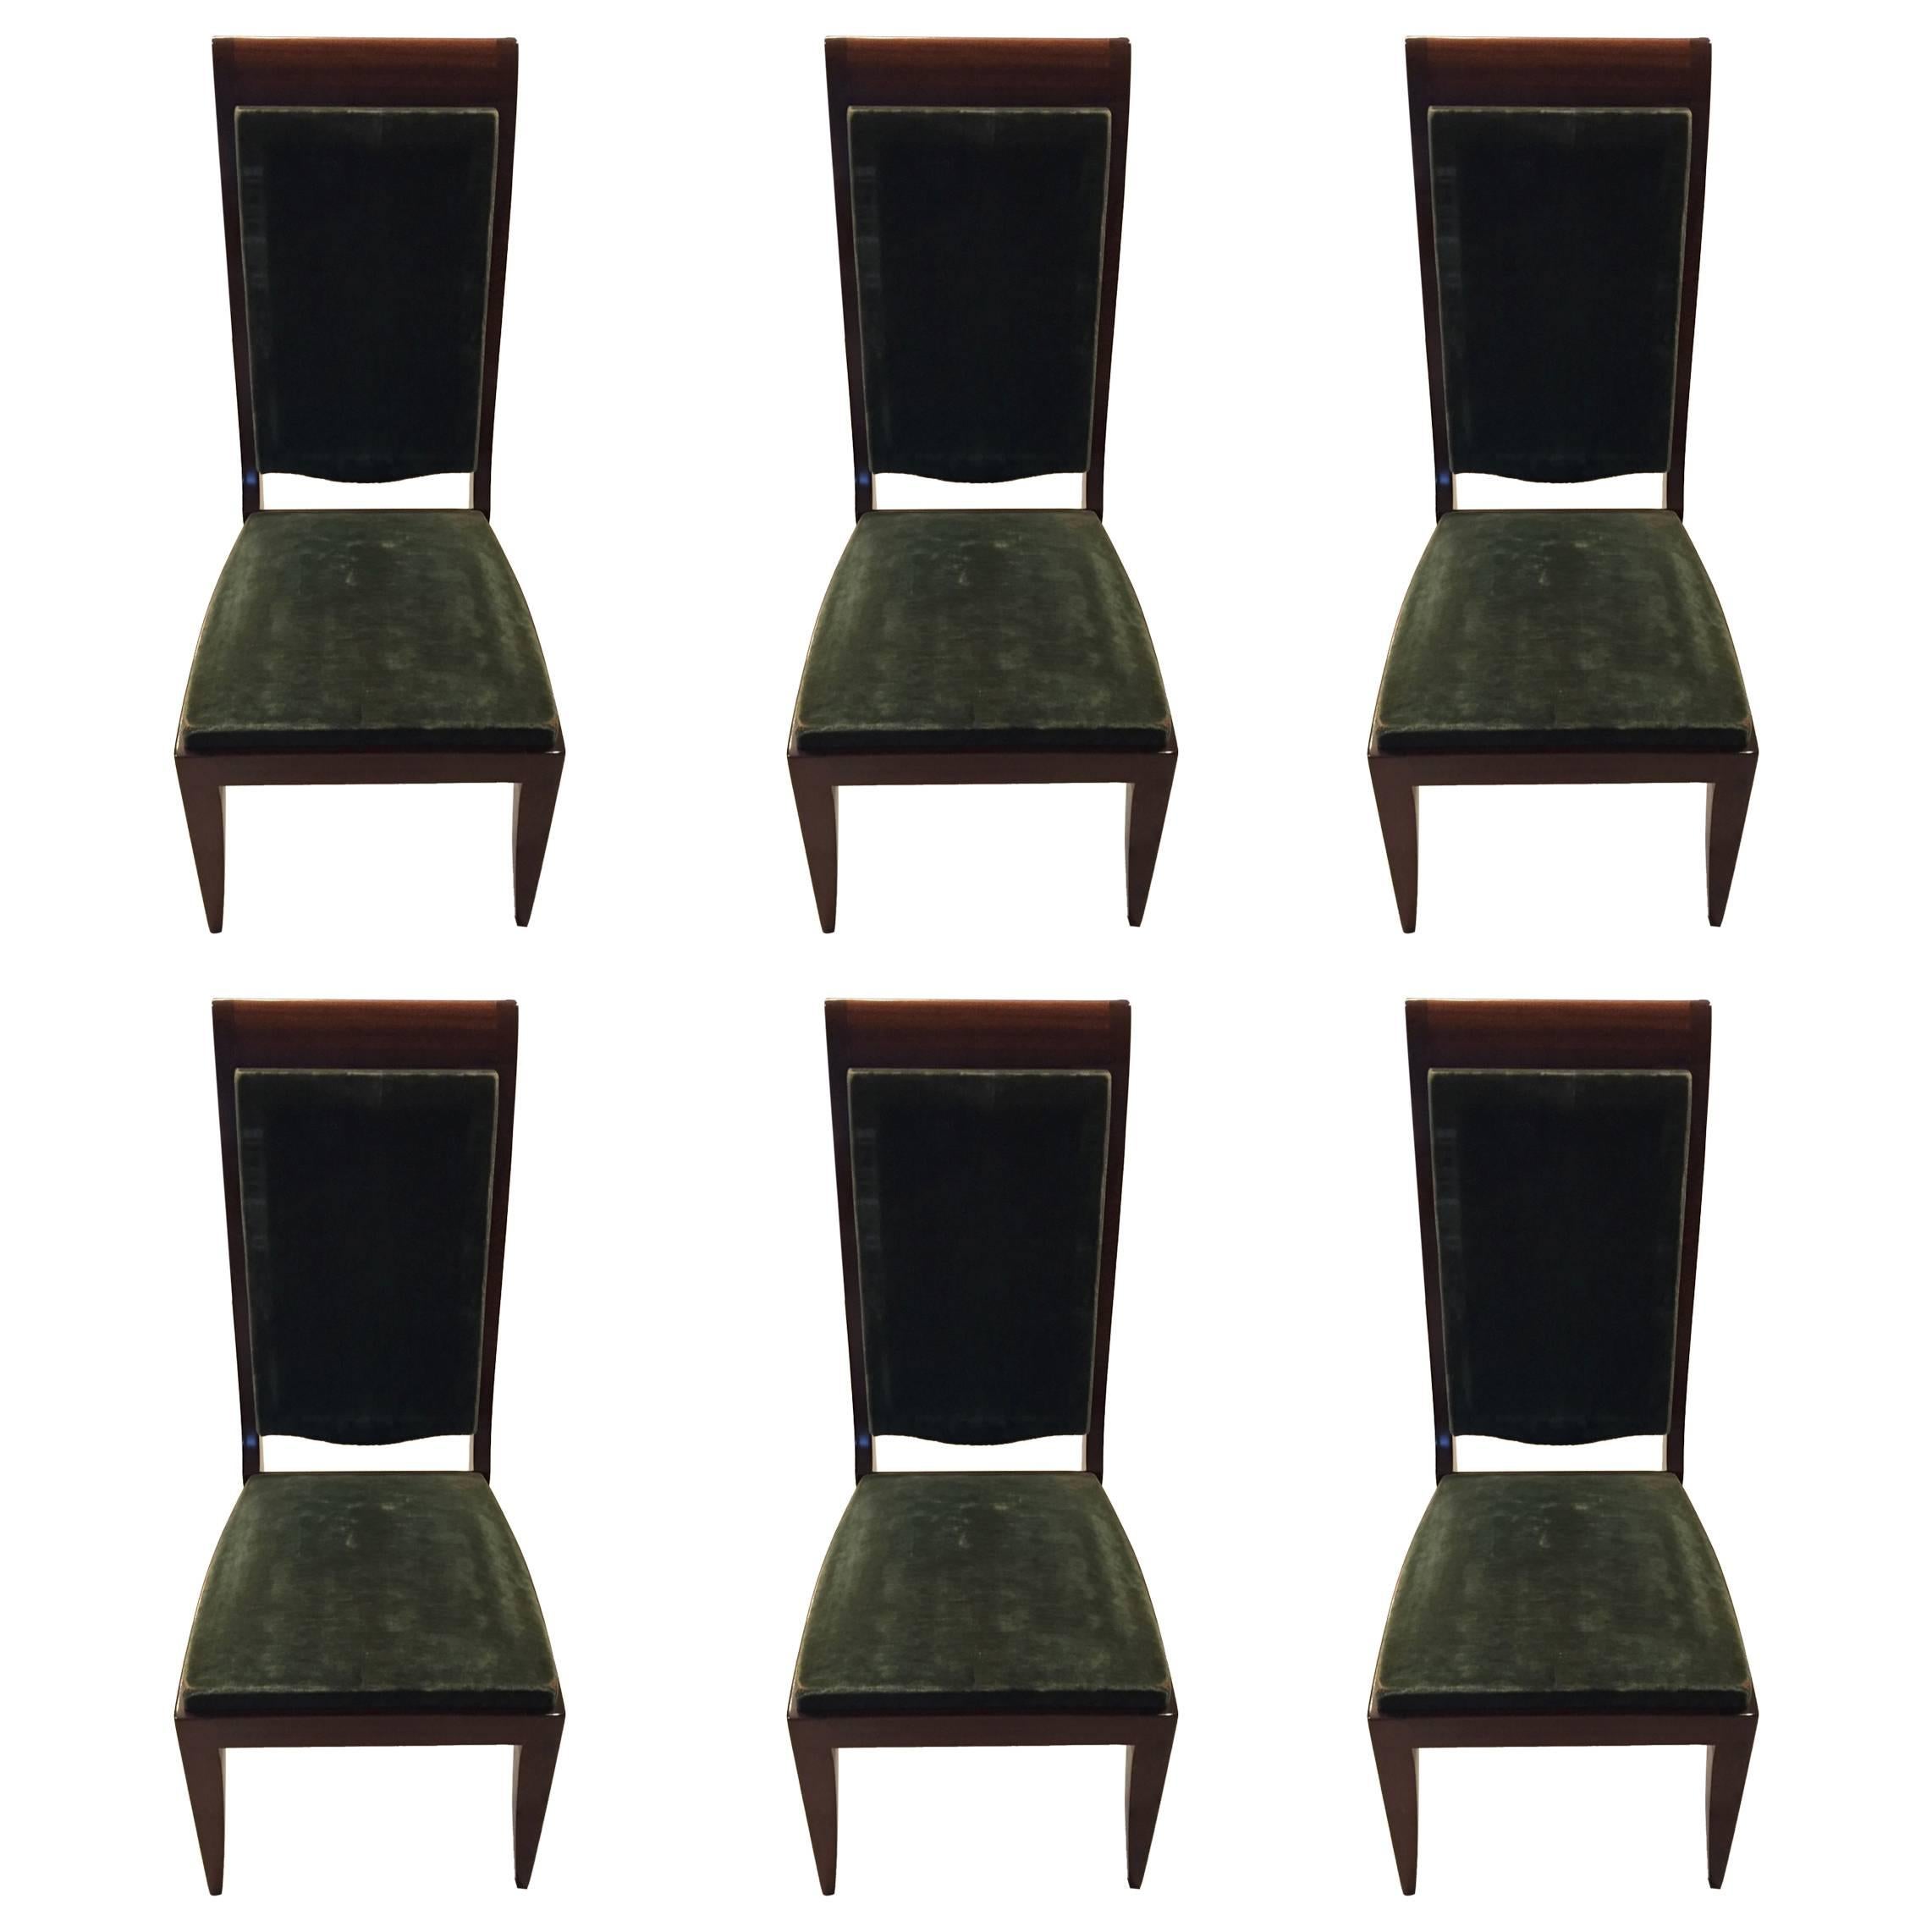 Six Gaston Poisson Numbered French Art Deco Dining Chairs